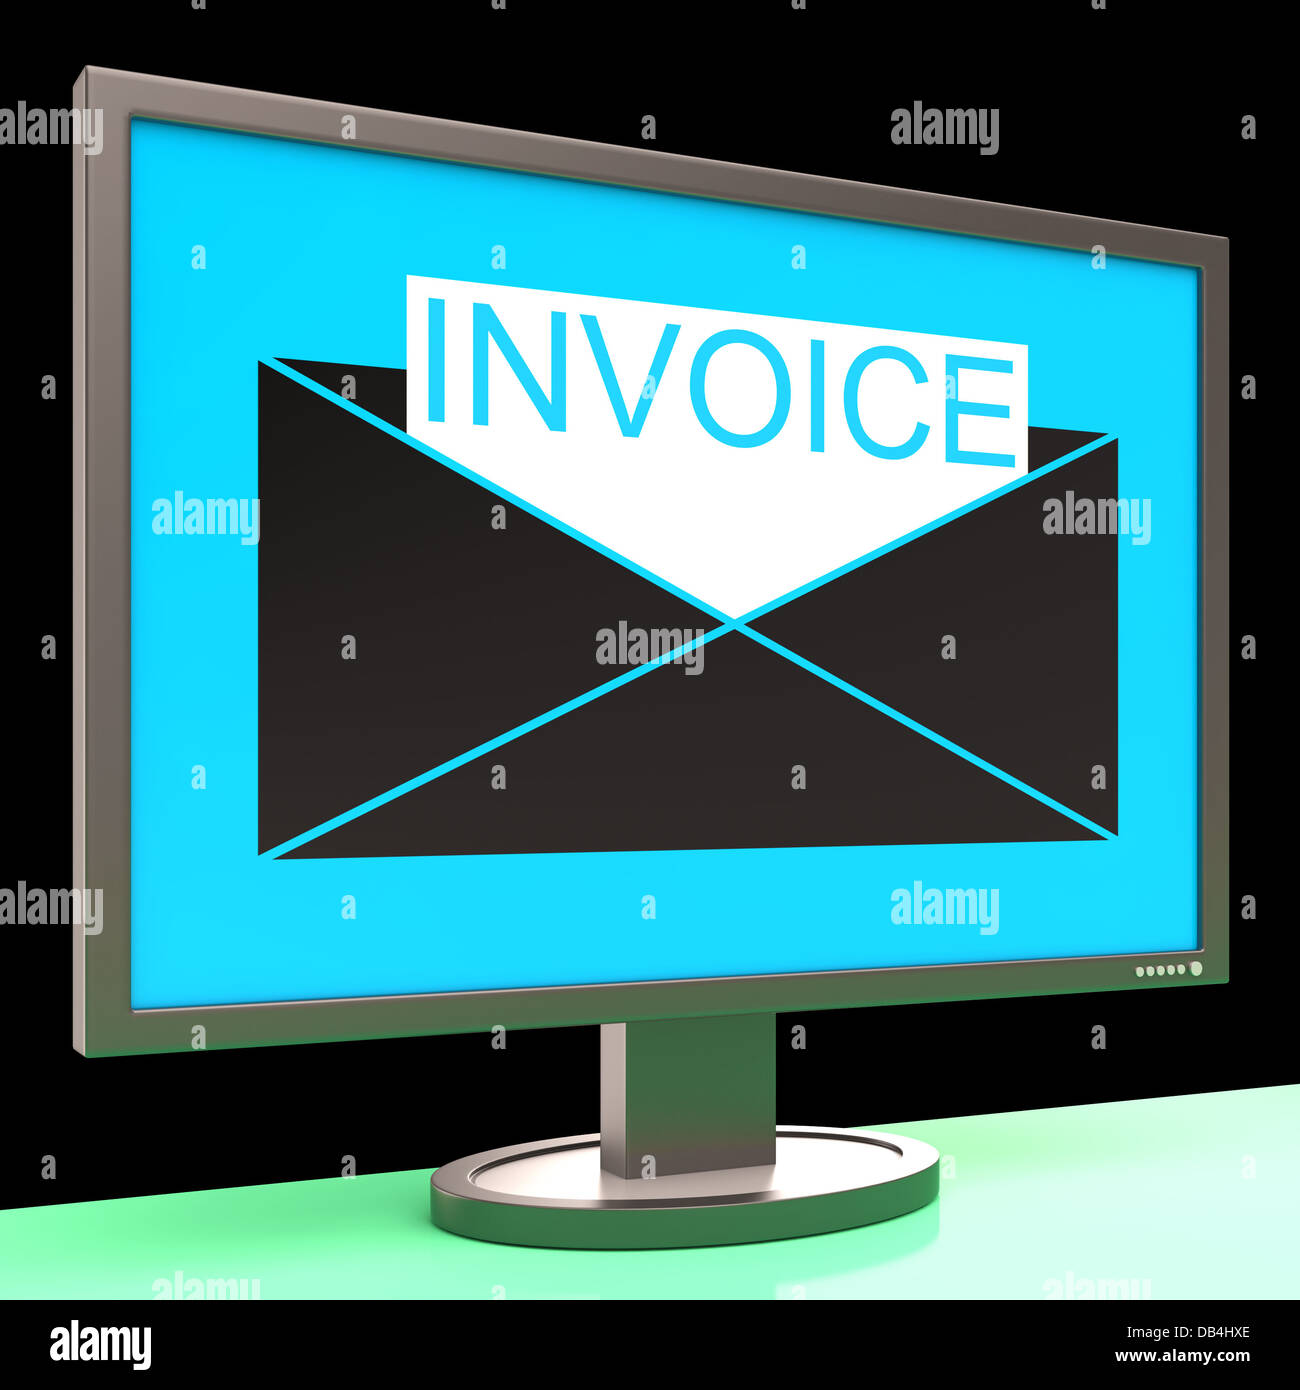 Invoice In Envelope On Monitor Showing Sending Payments Stock Photo